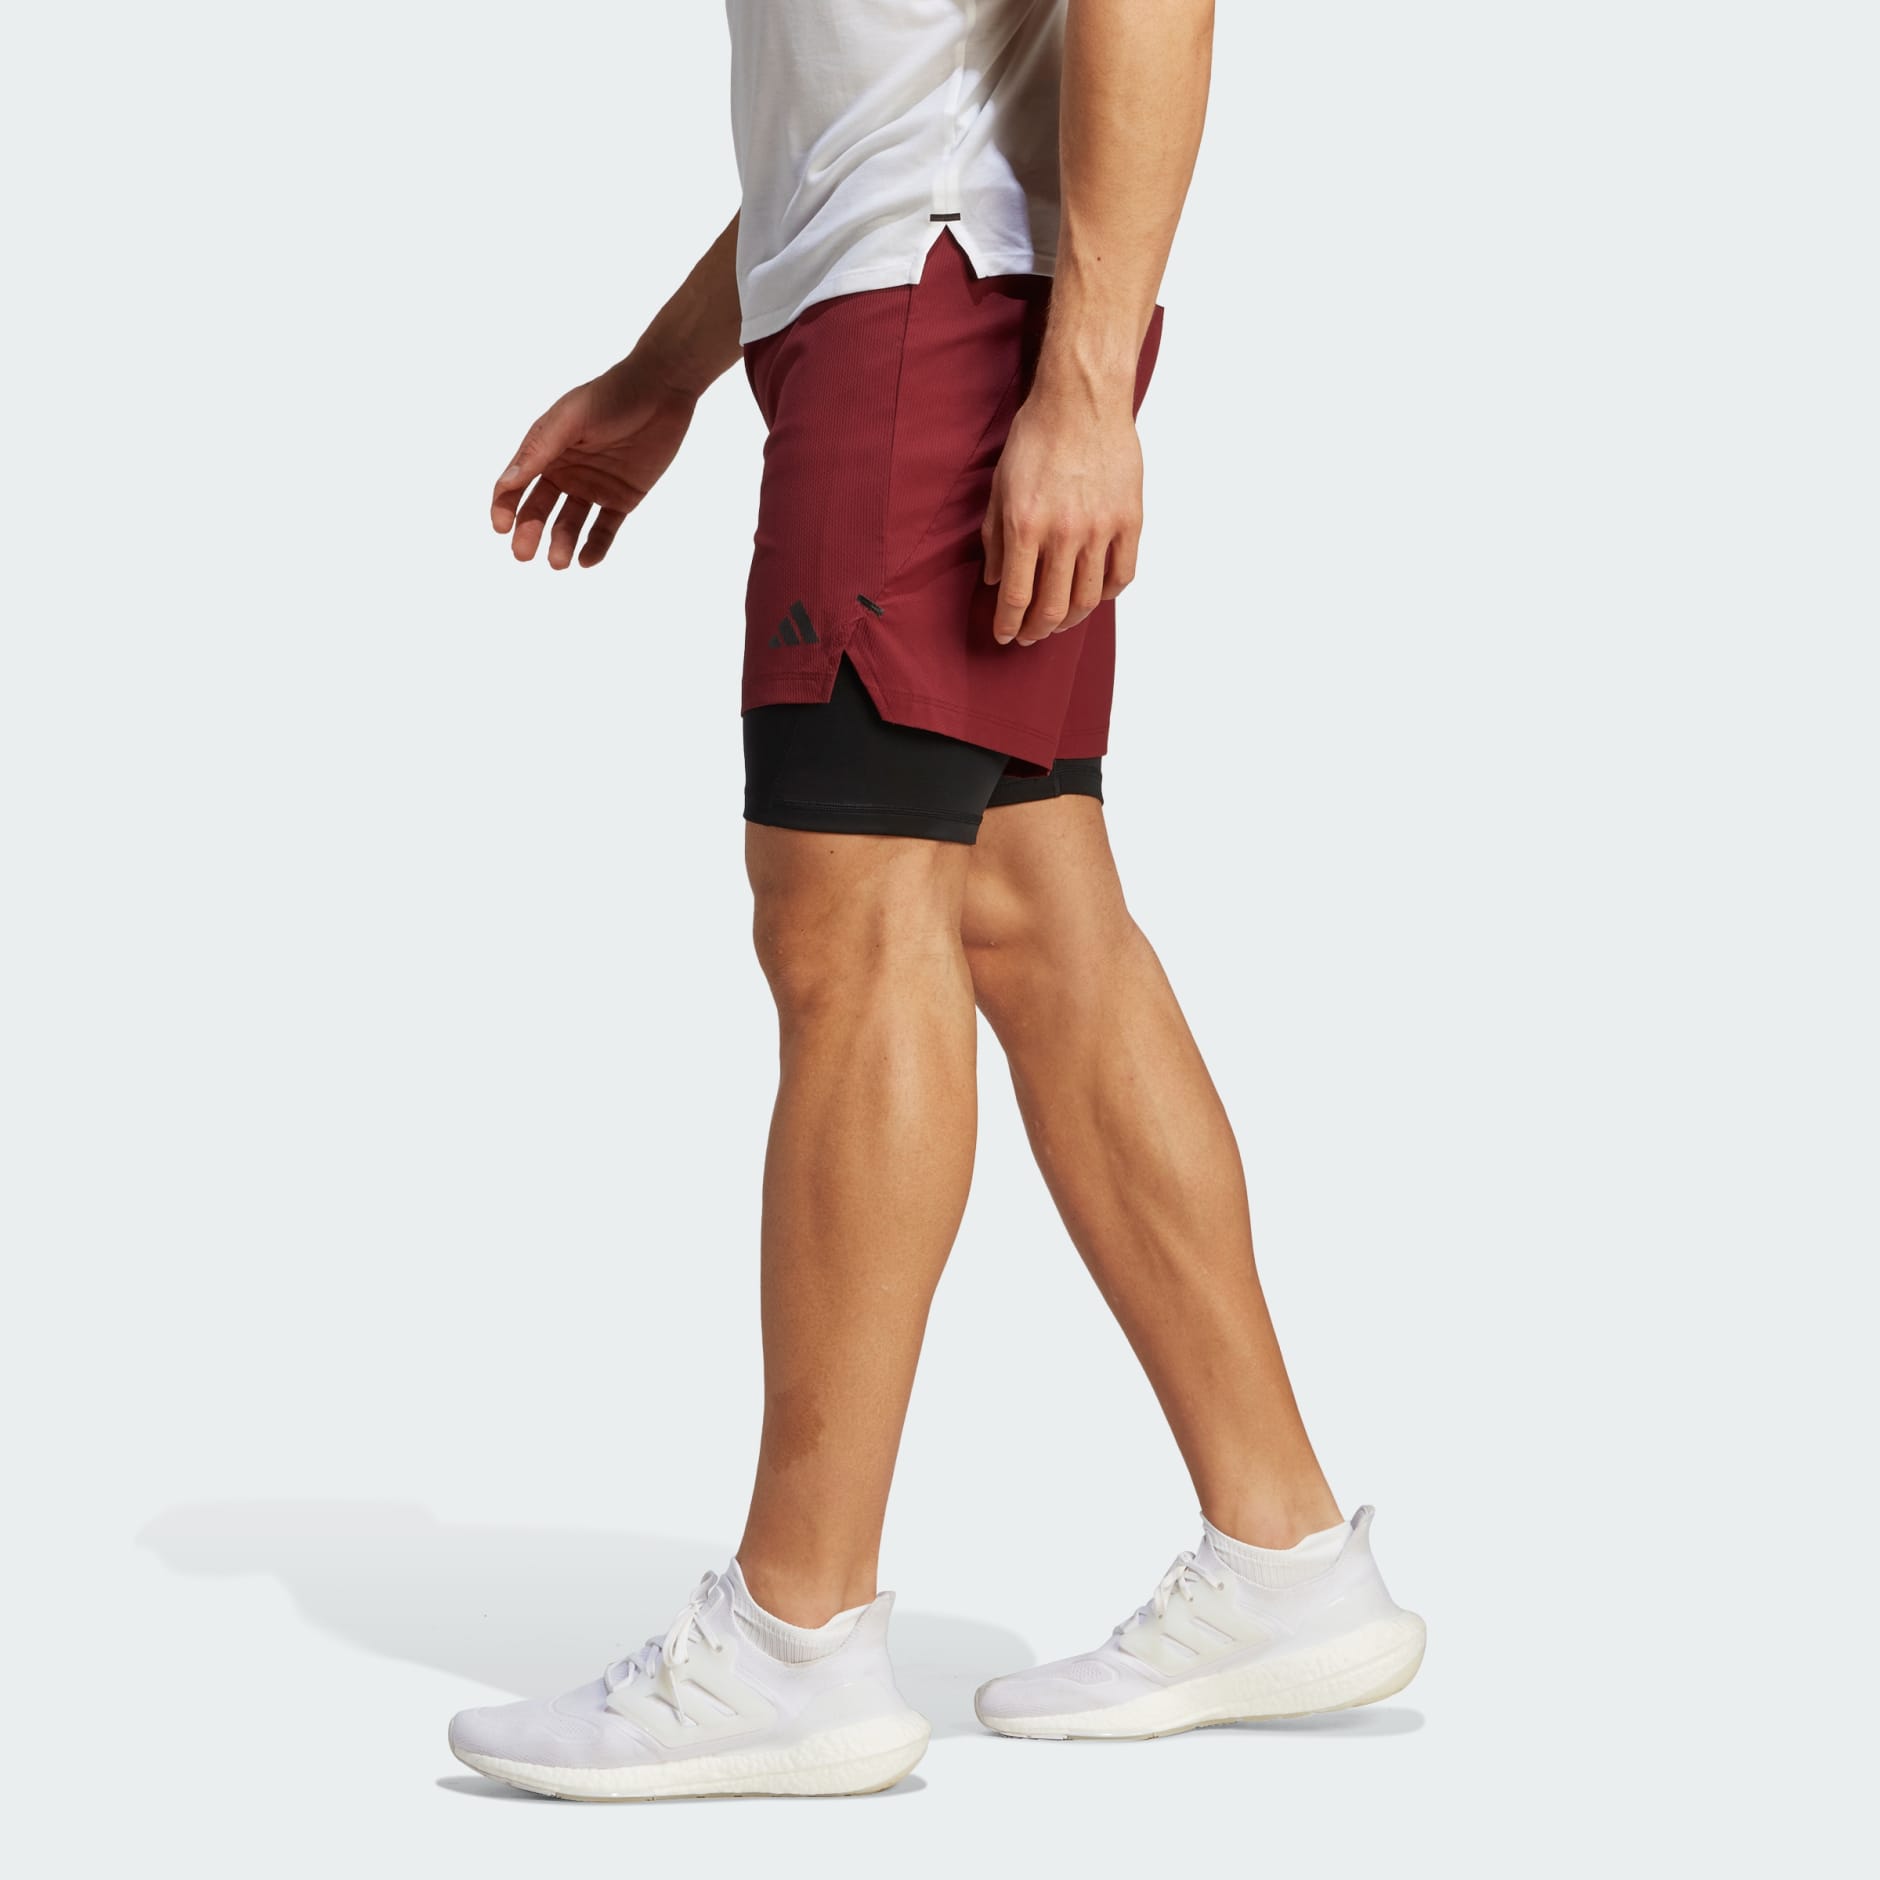 Men's Clothing - Power Workout Two-in-One Shorts - Burgundy